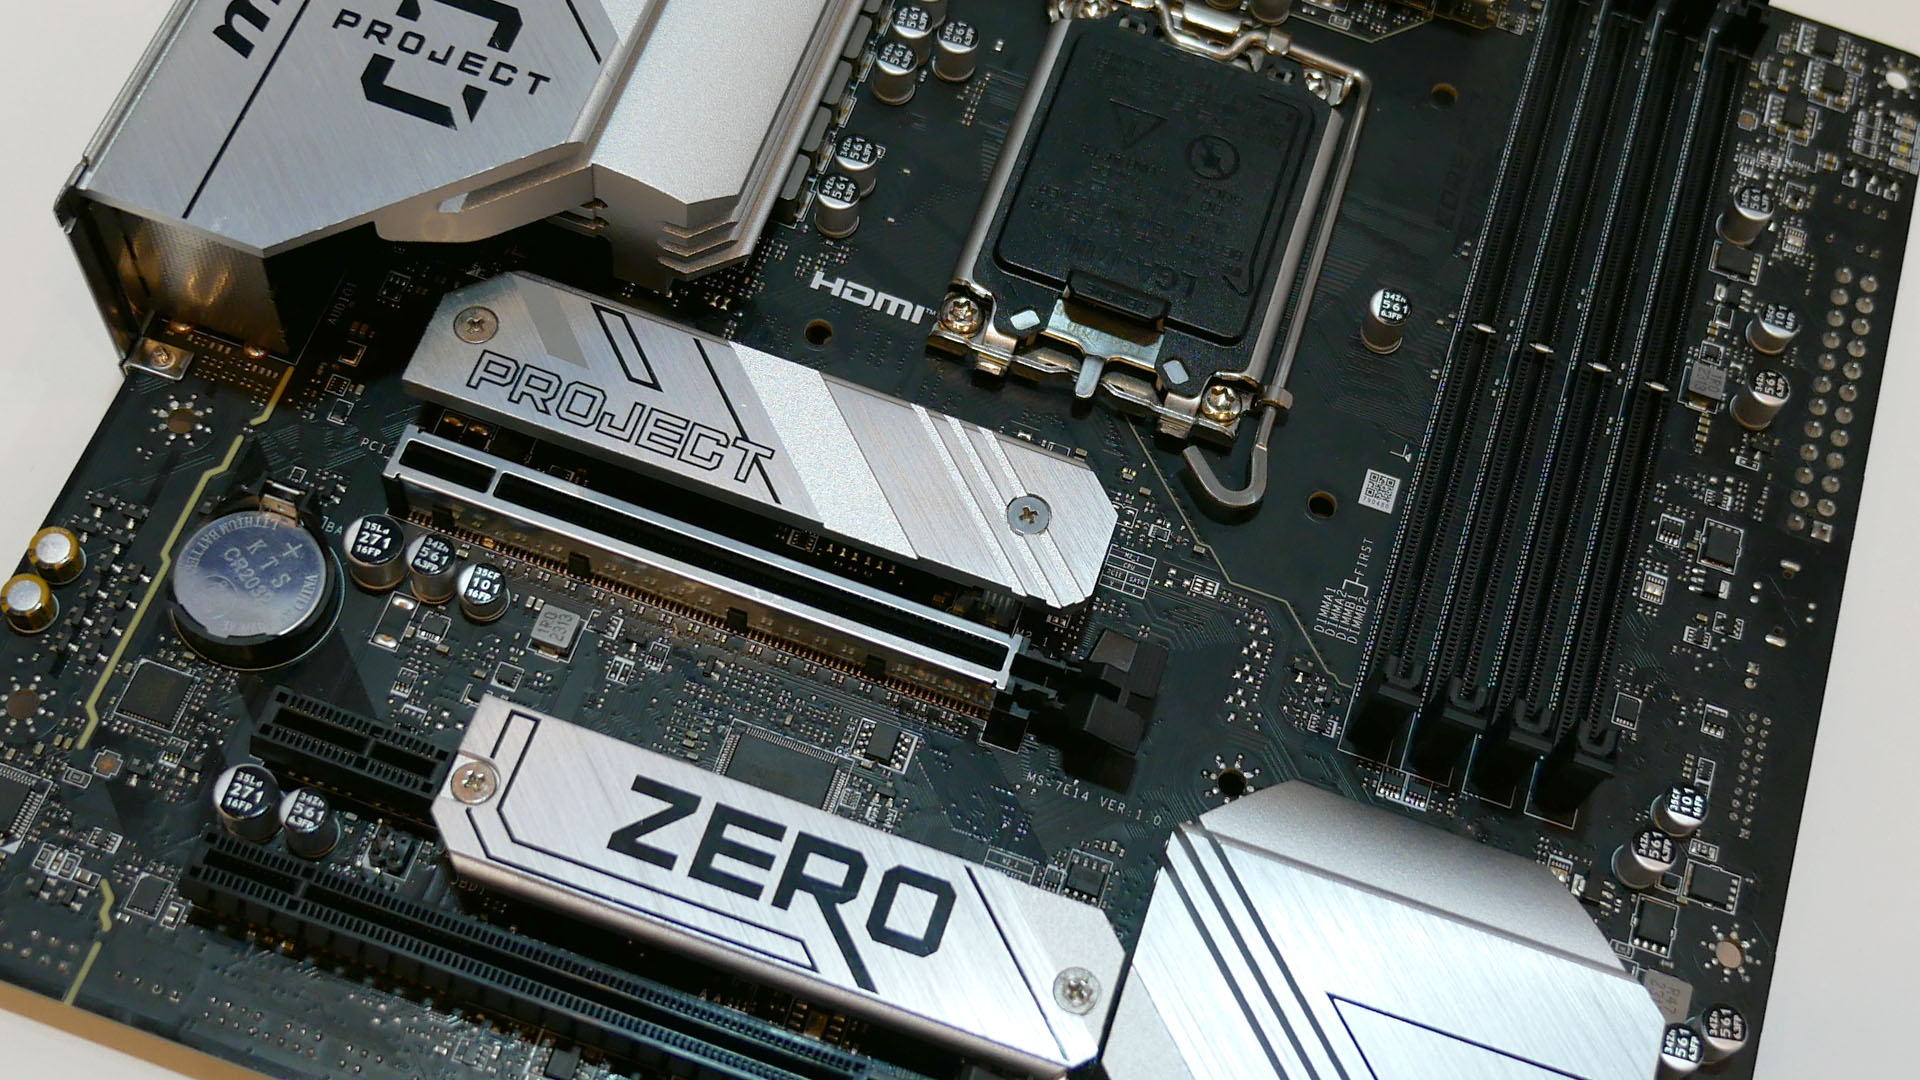 This motherboard innovation is going to revolutionize gaming PC design